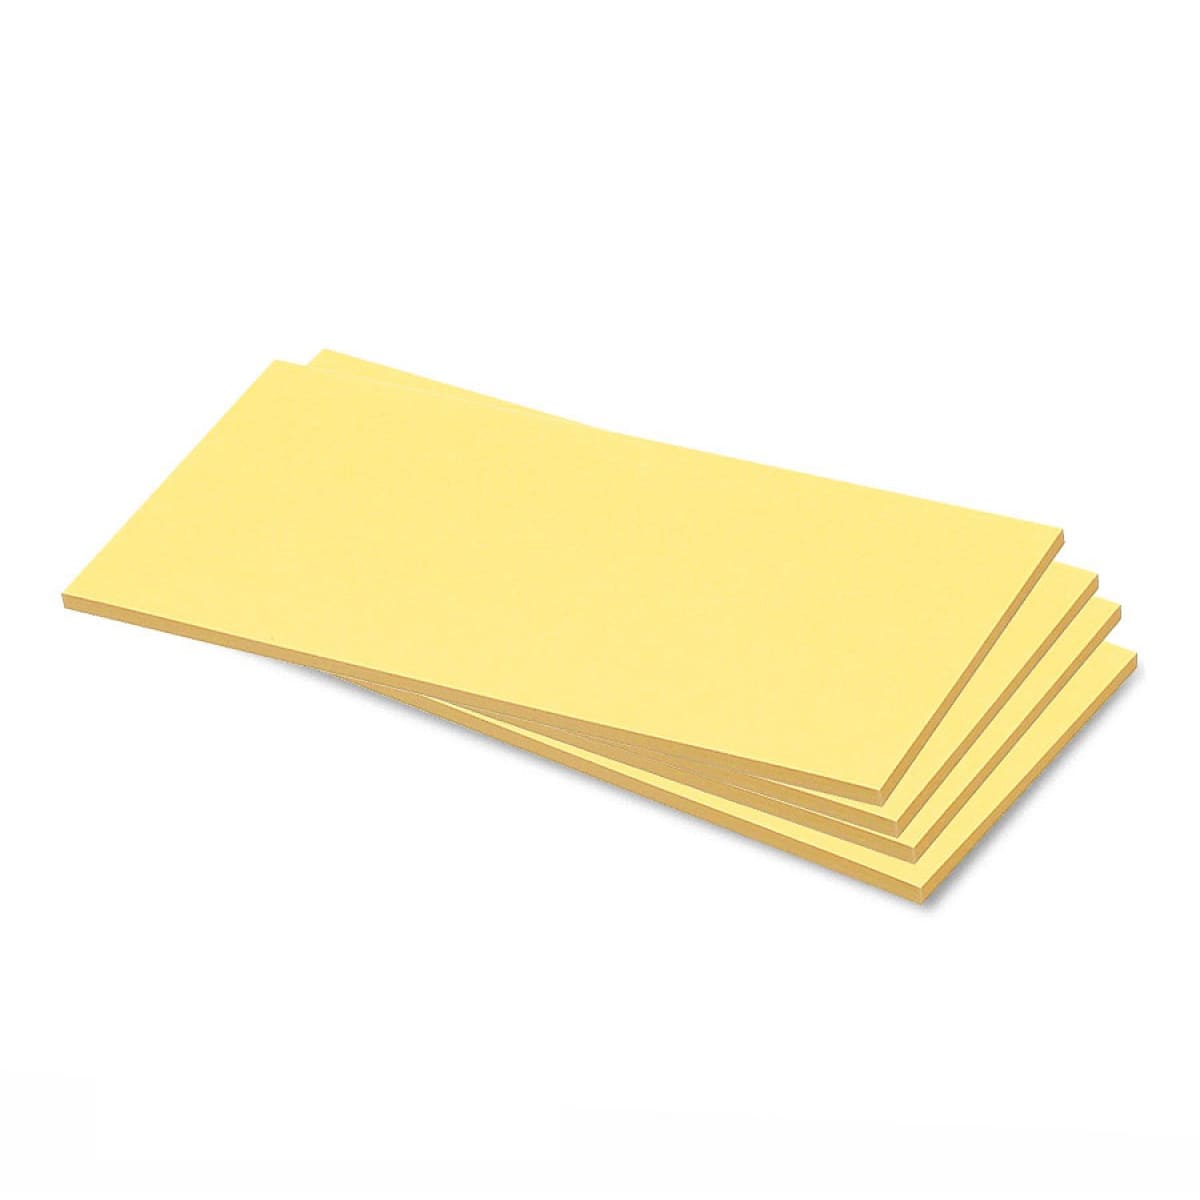 Stick-It Cards, rectangular, 100 sheets, single colors- 5 gelb